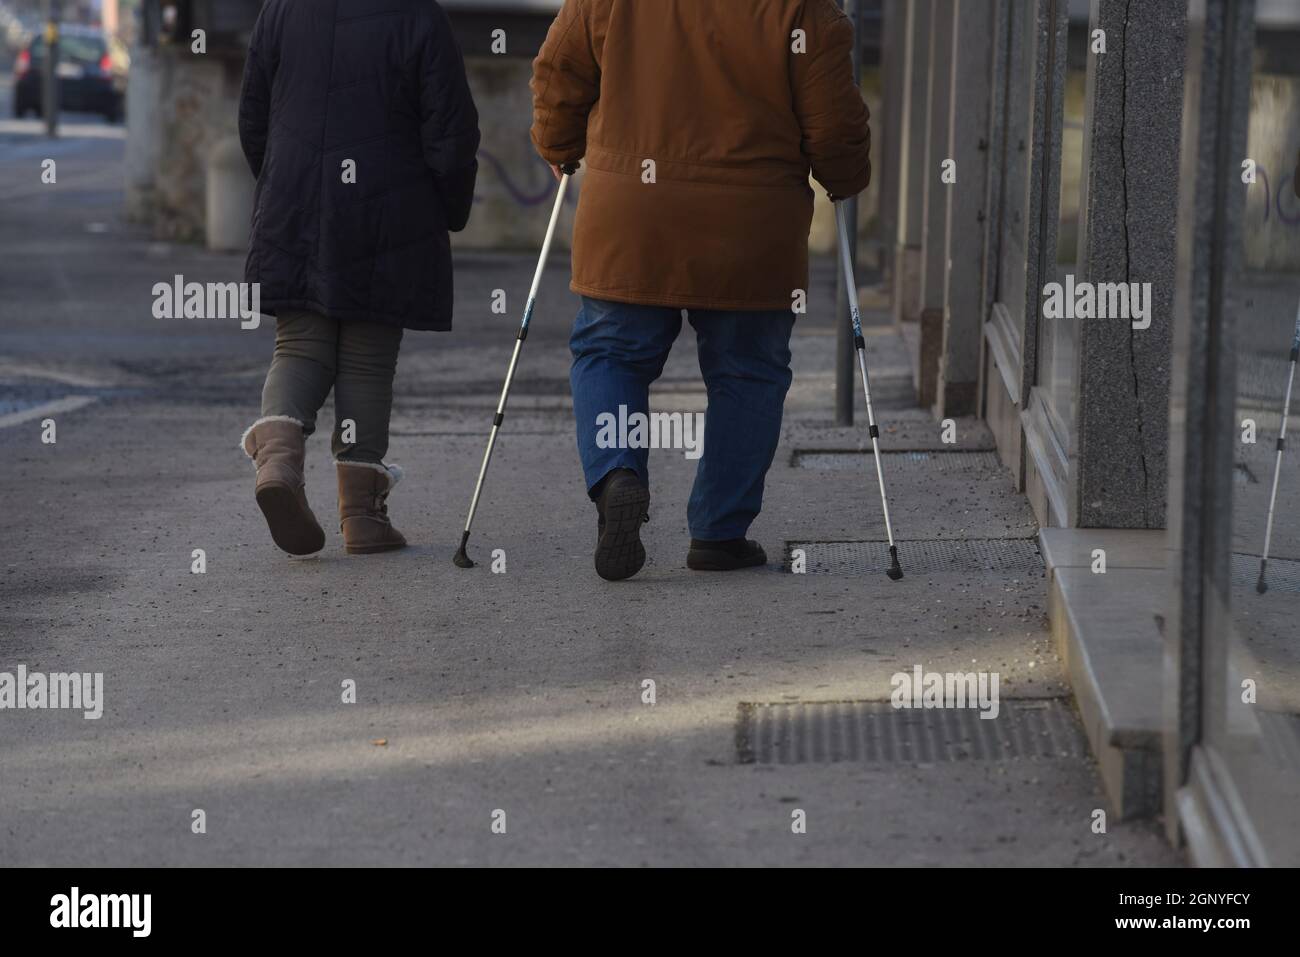 crutches as a walking aid for people with walking disabilities Stock Photo